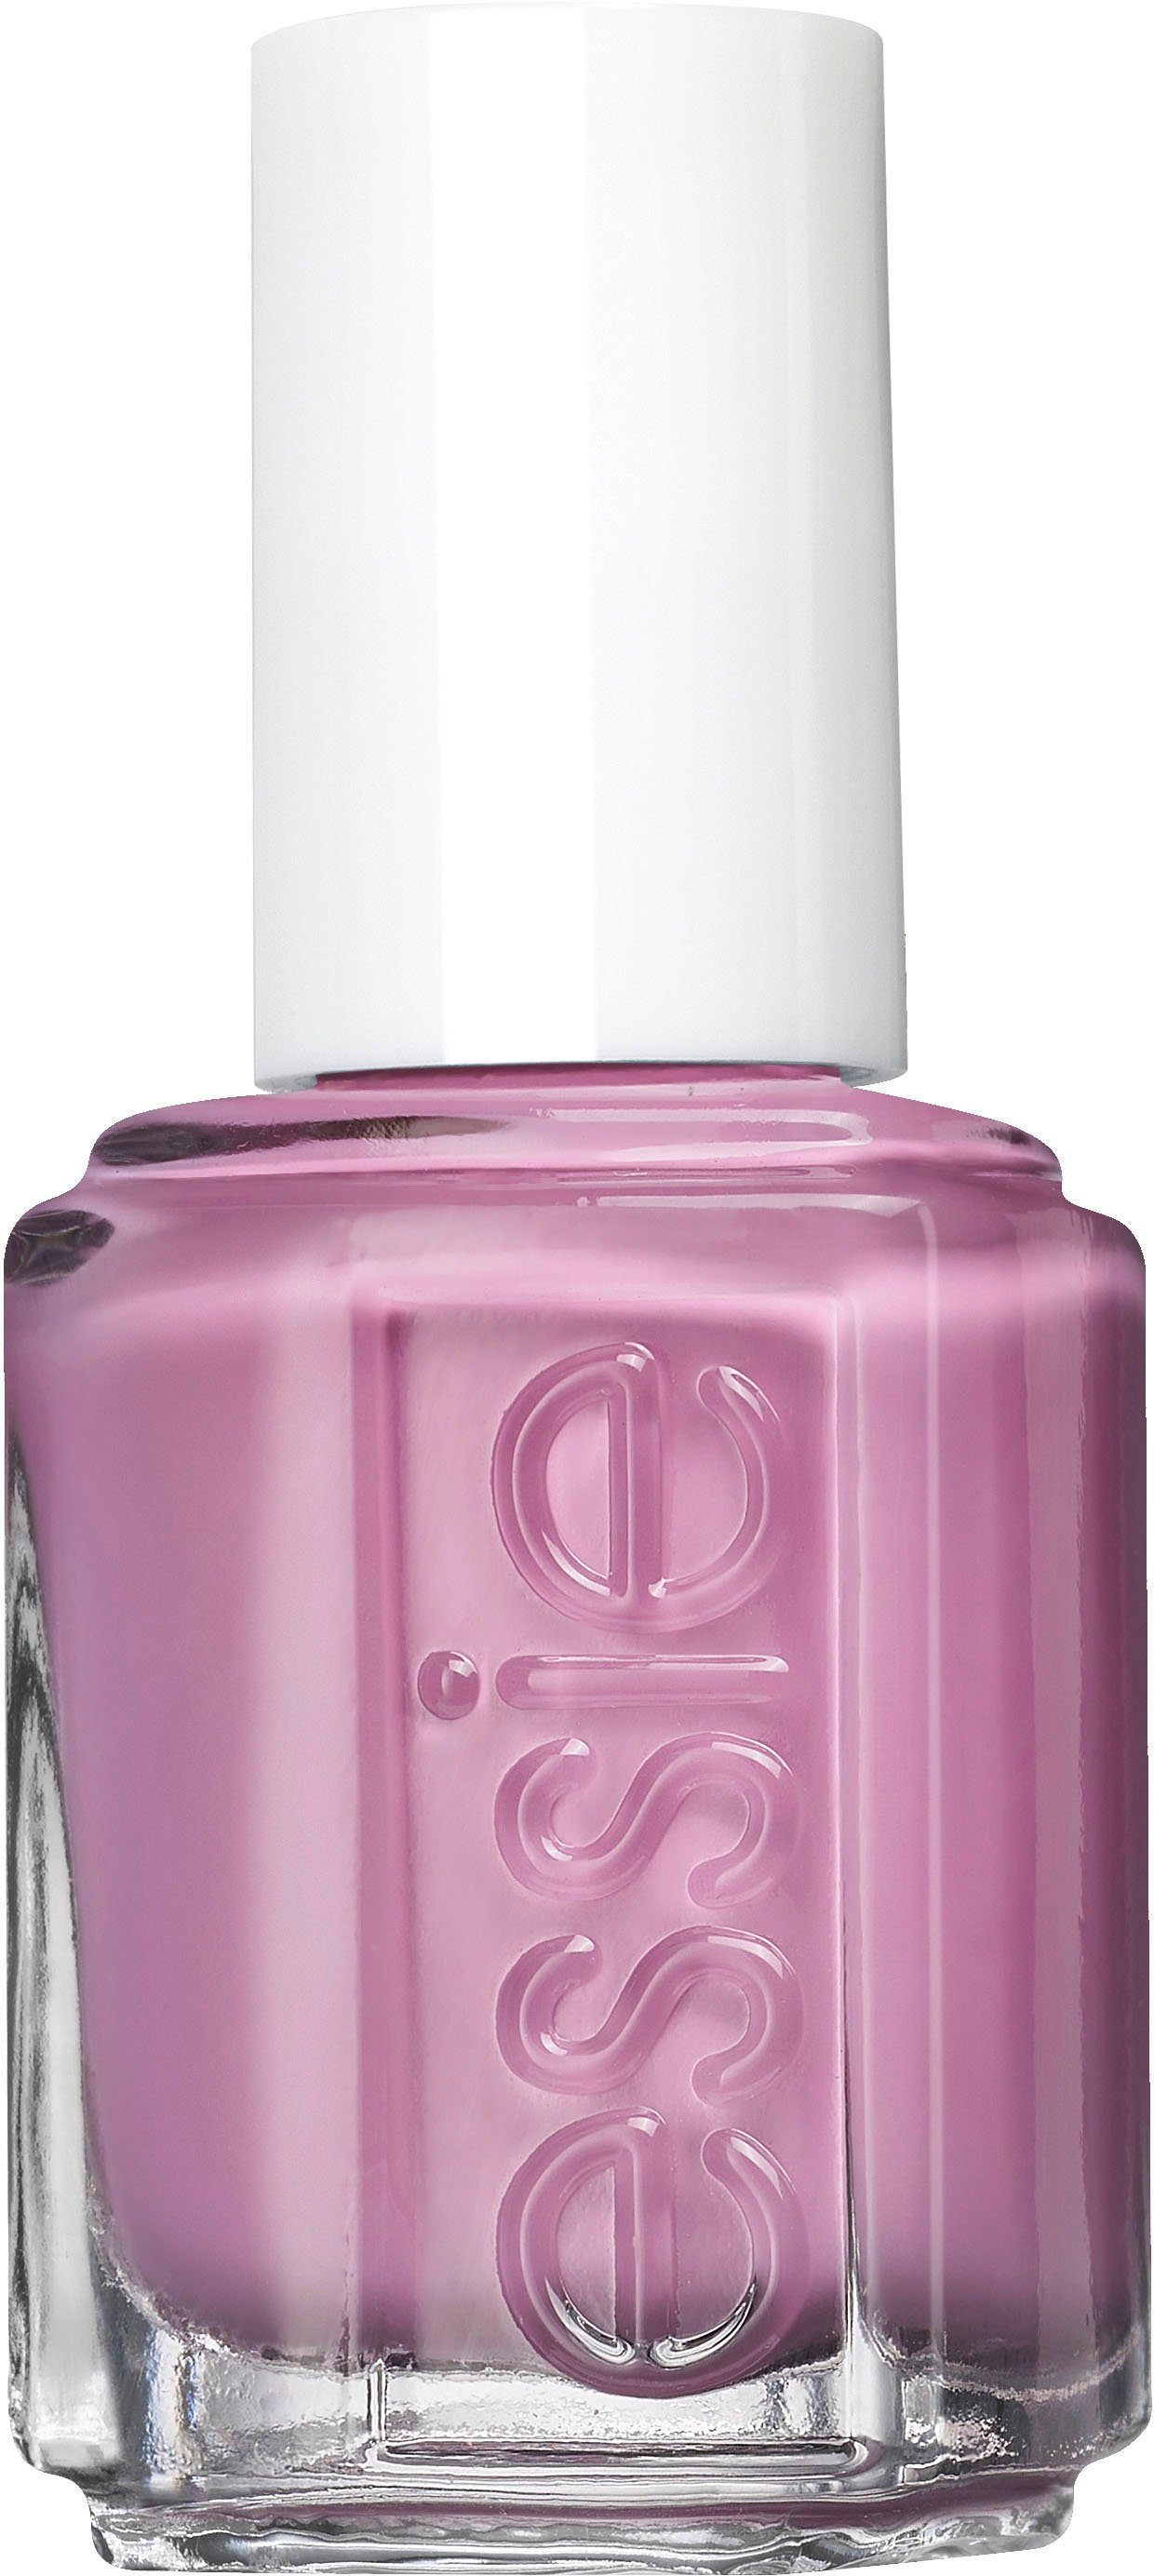 essie Nagellack Lilatöne Nr. 718 suits you swell